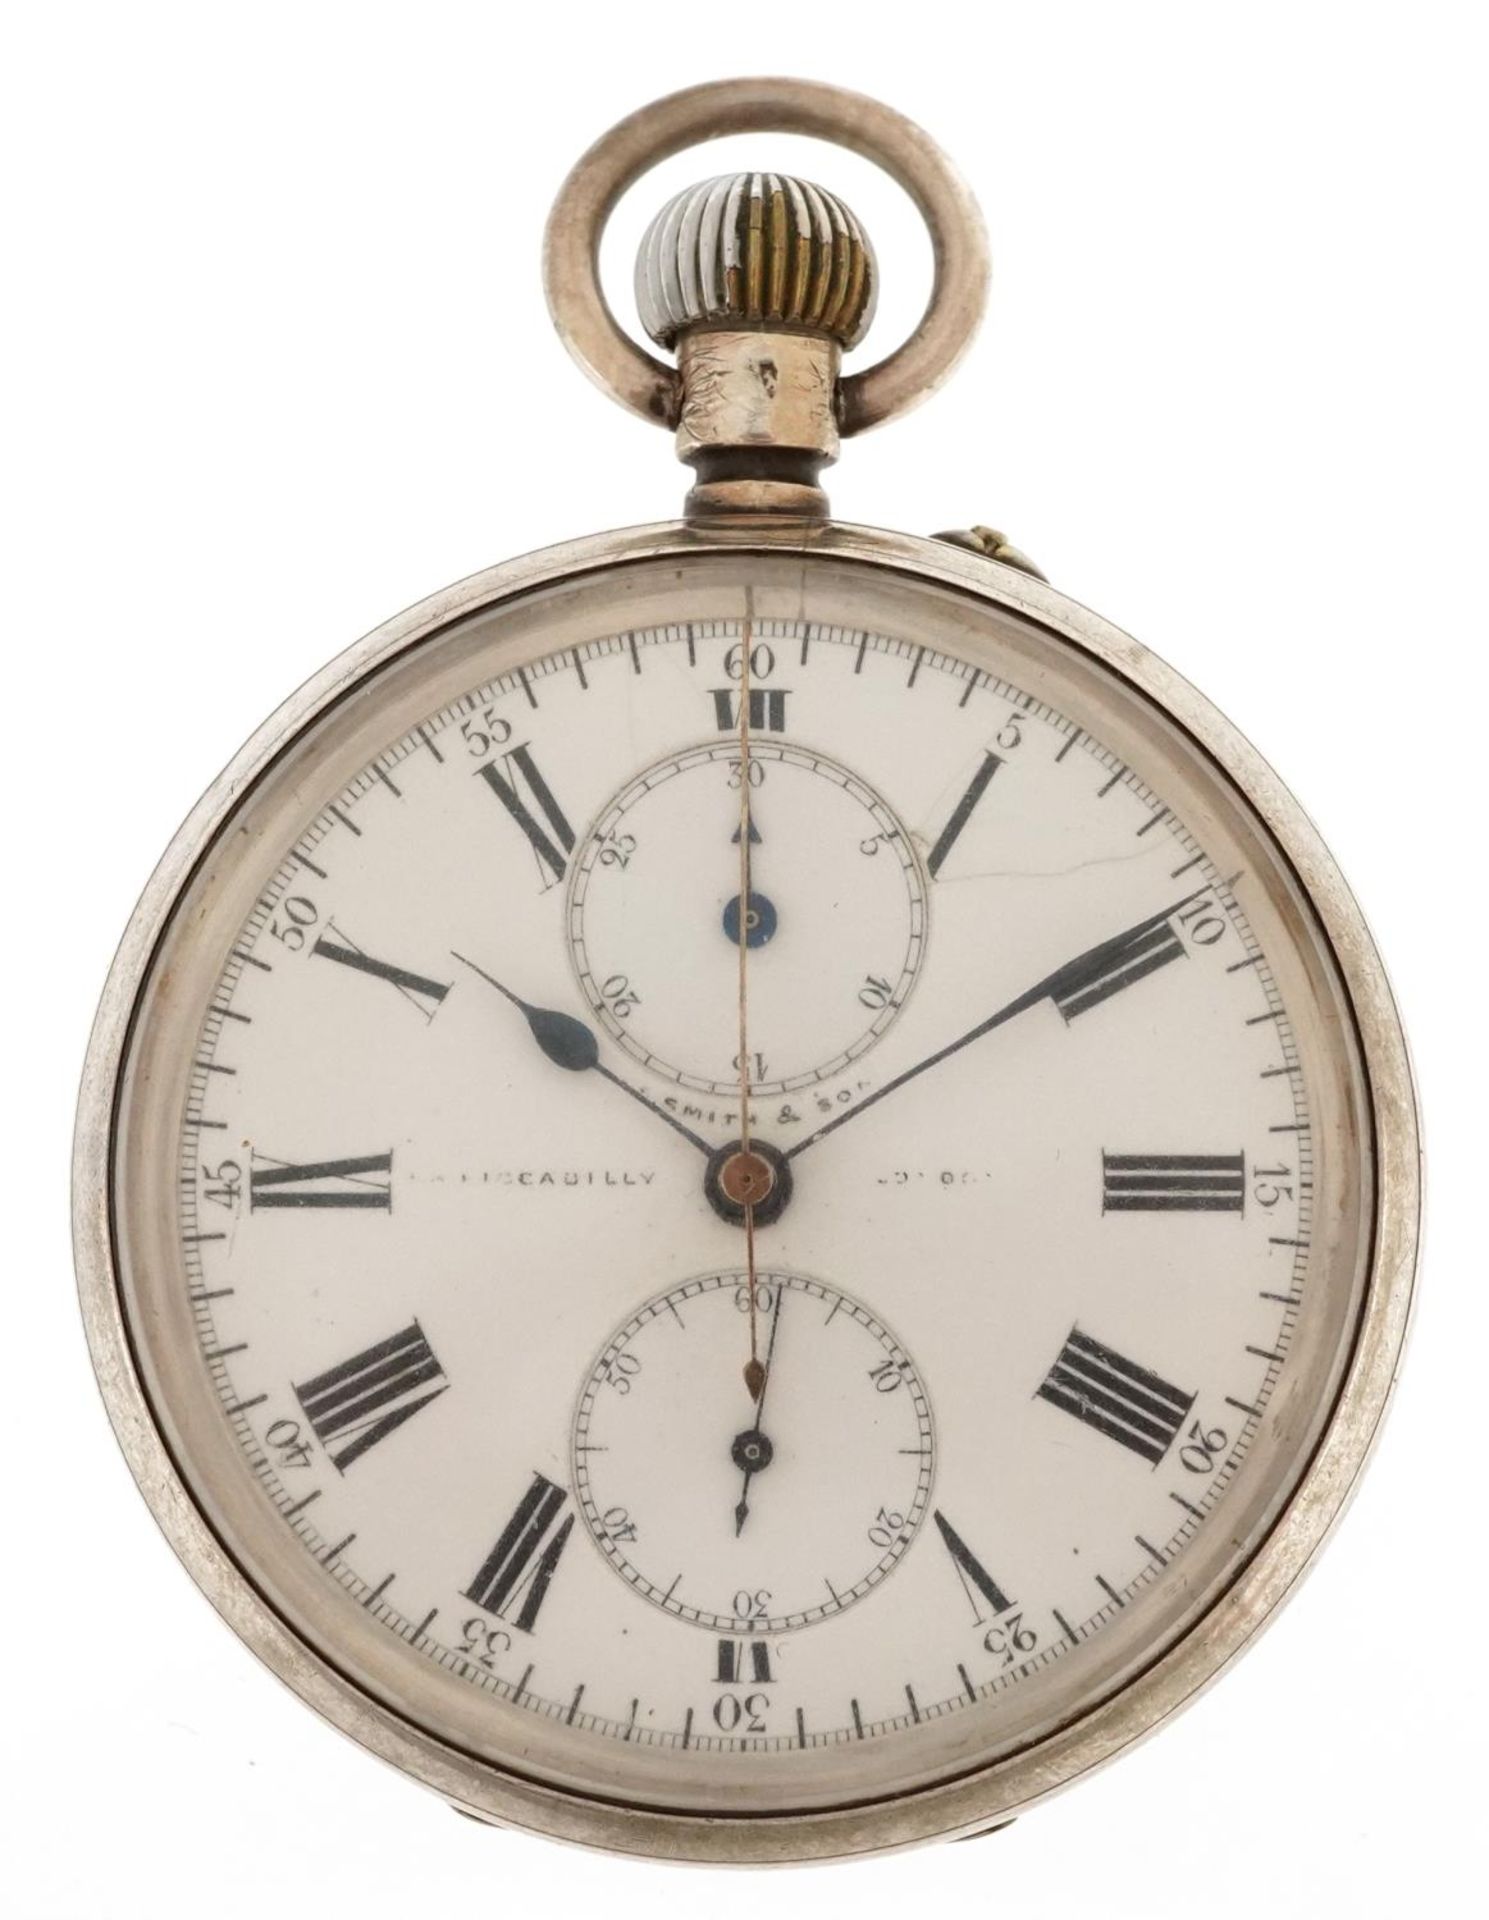 Gentlemen's continental silver keyless open face chronograph pocket watch having enamelled and